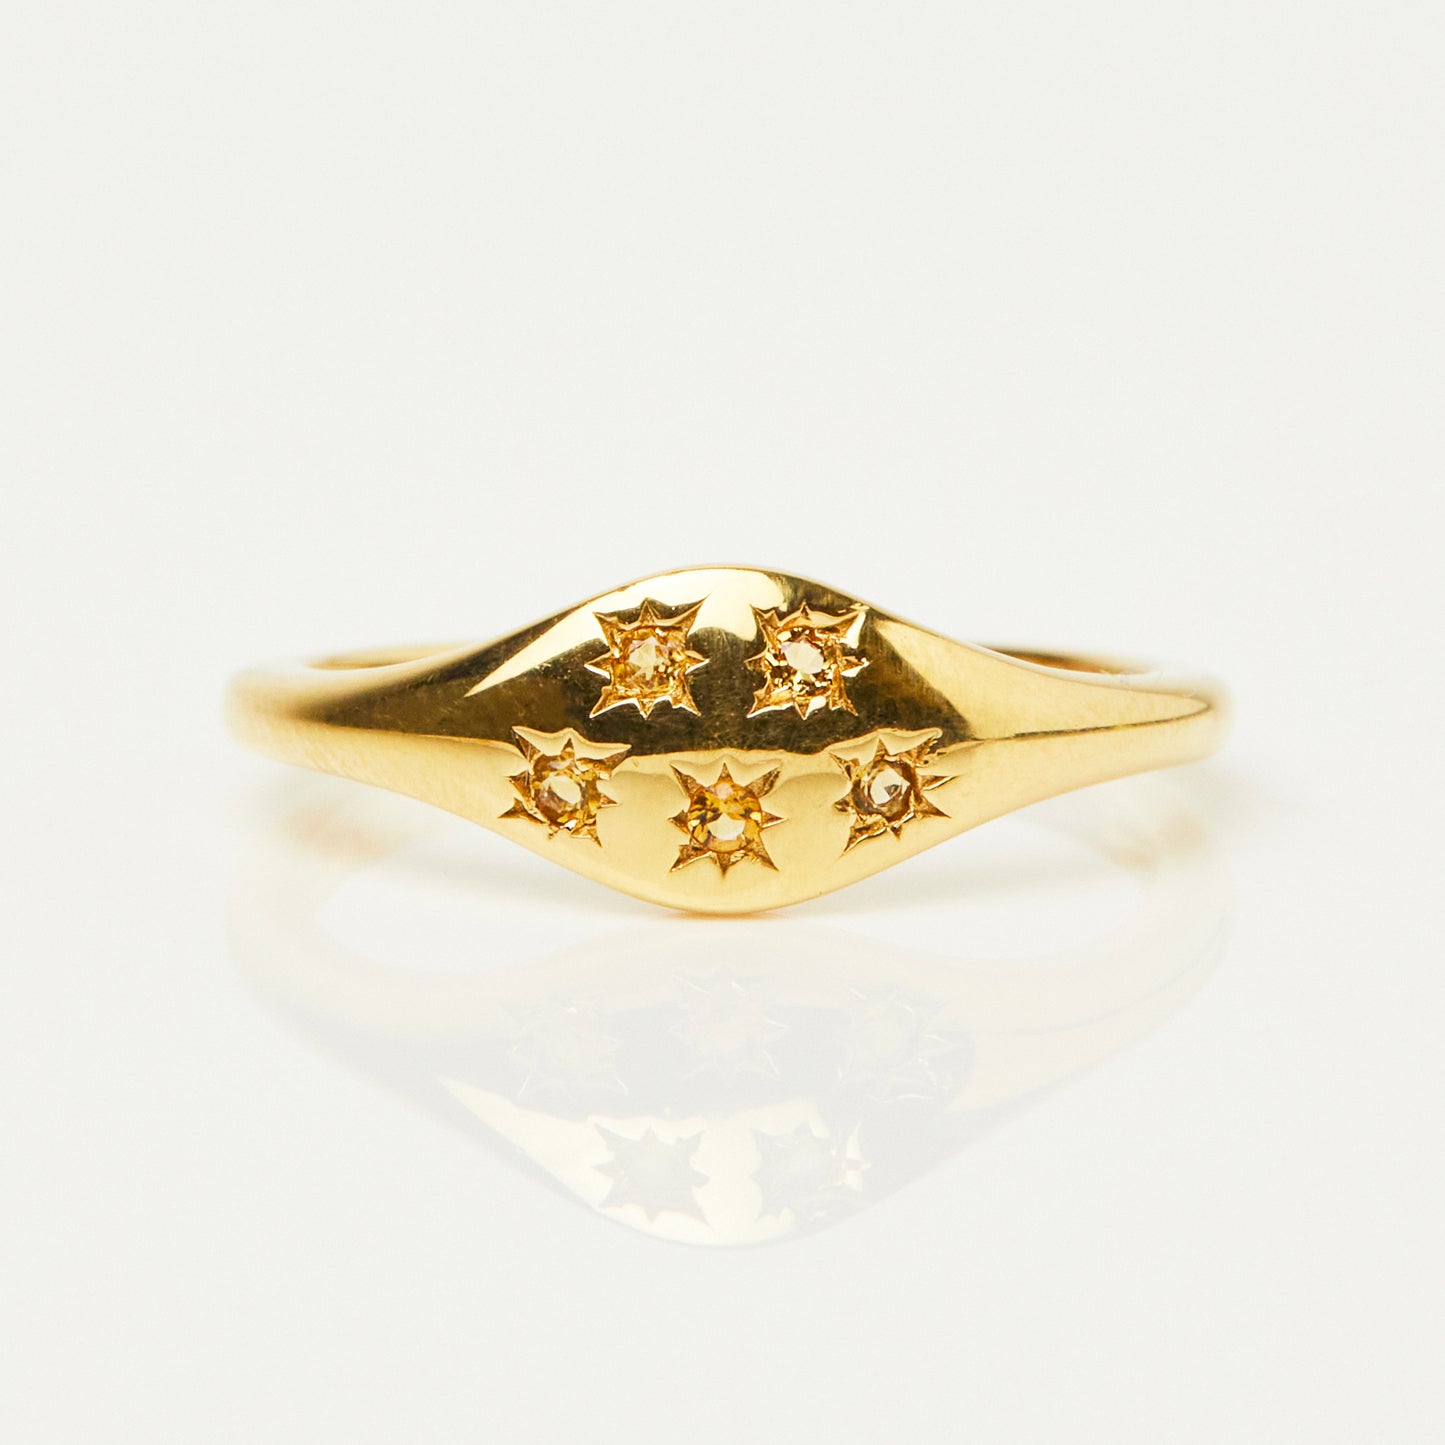 Zoe sugg intentions success citrine ring in gold